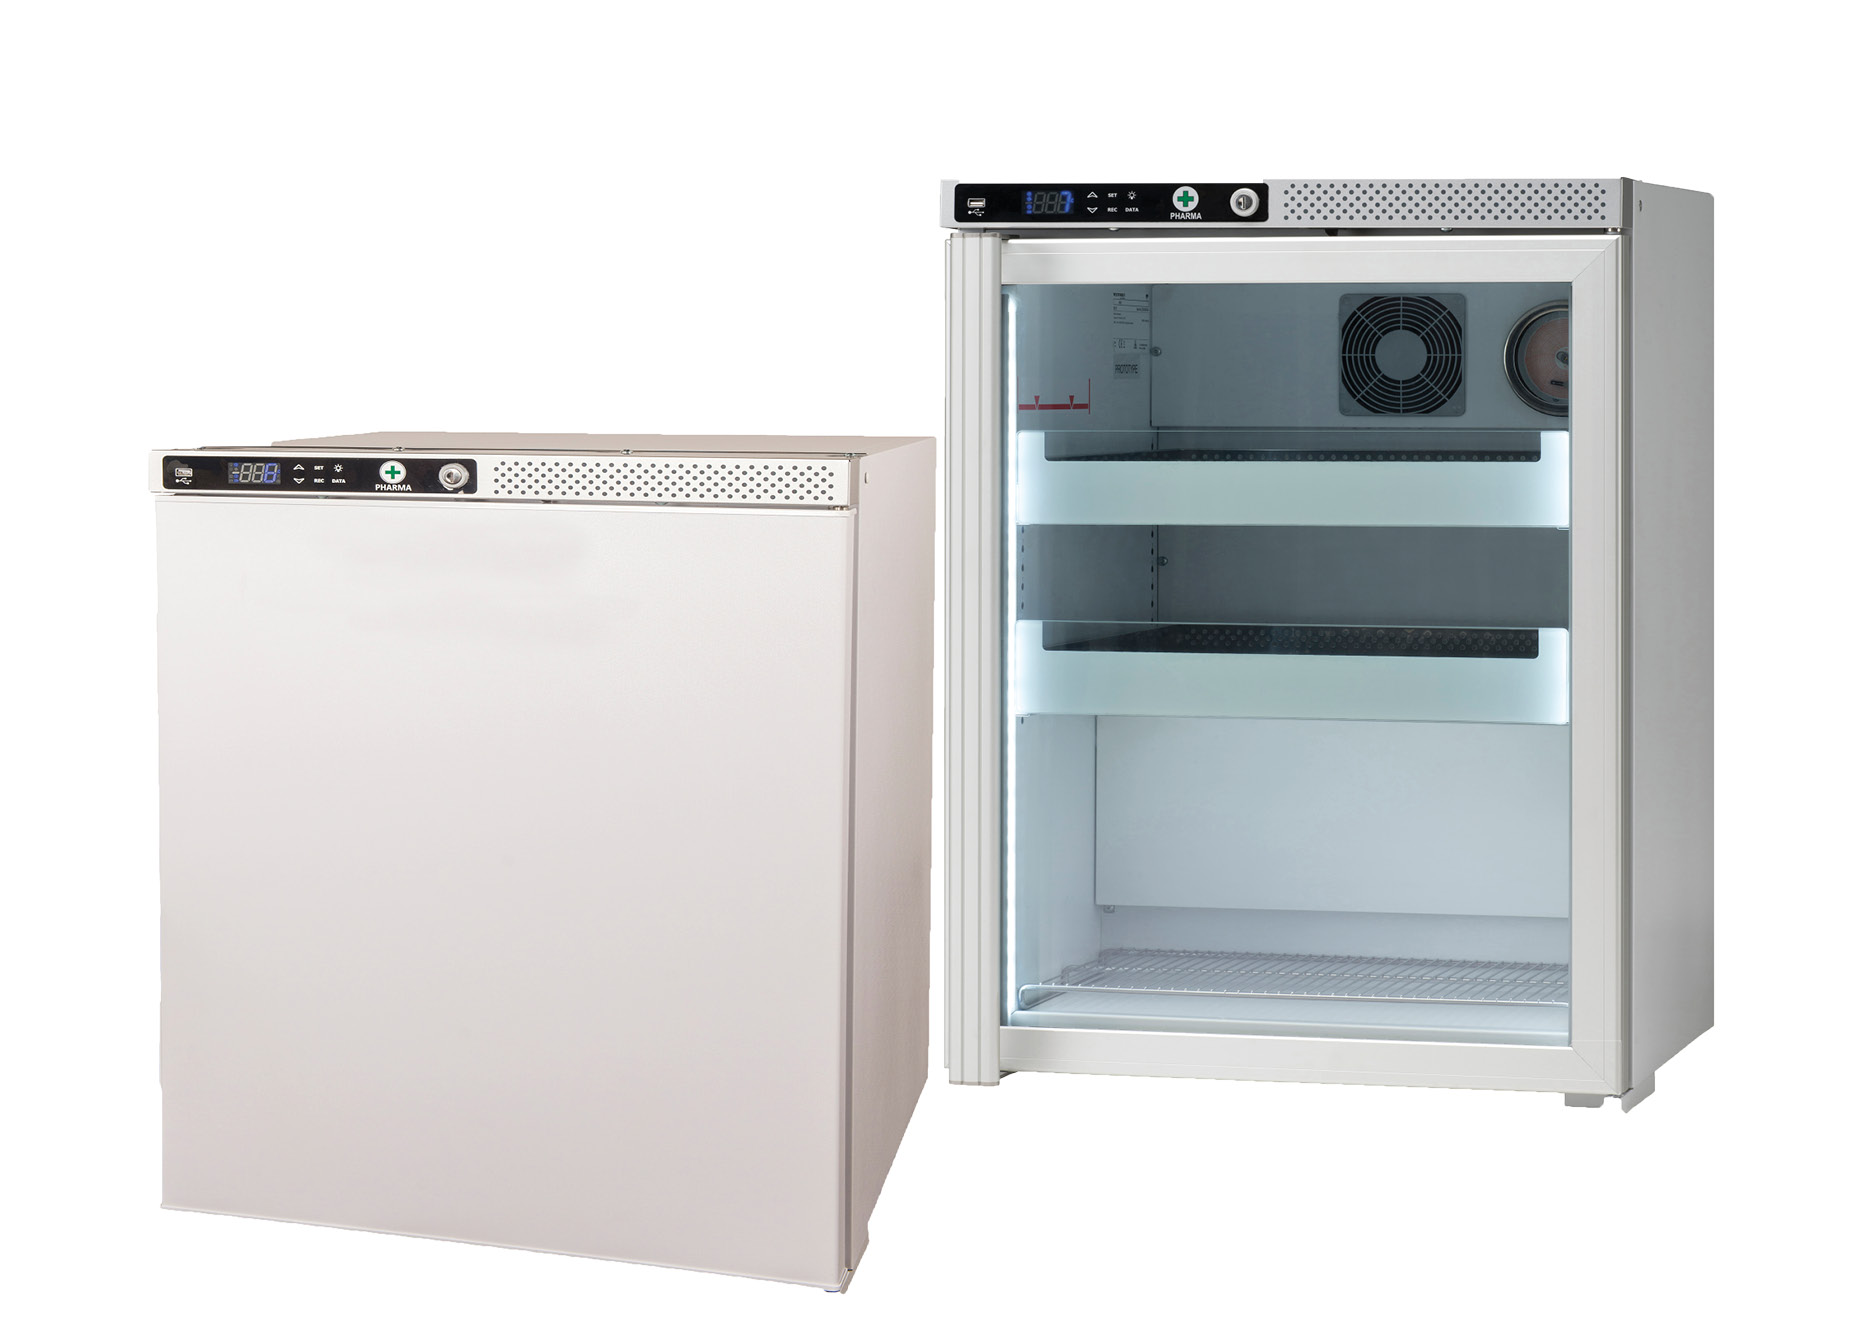 Laboratory and pharmaceutical refrigerators and freezers from Vestfrost